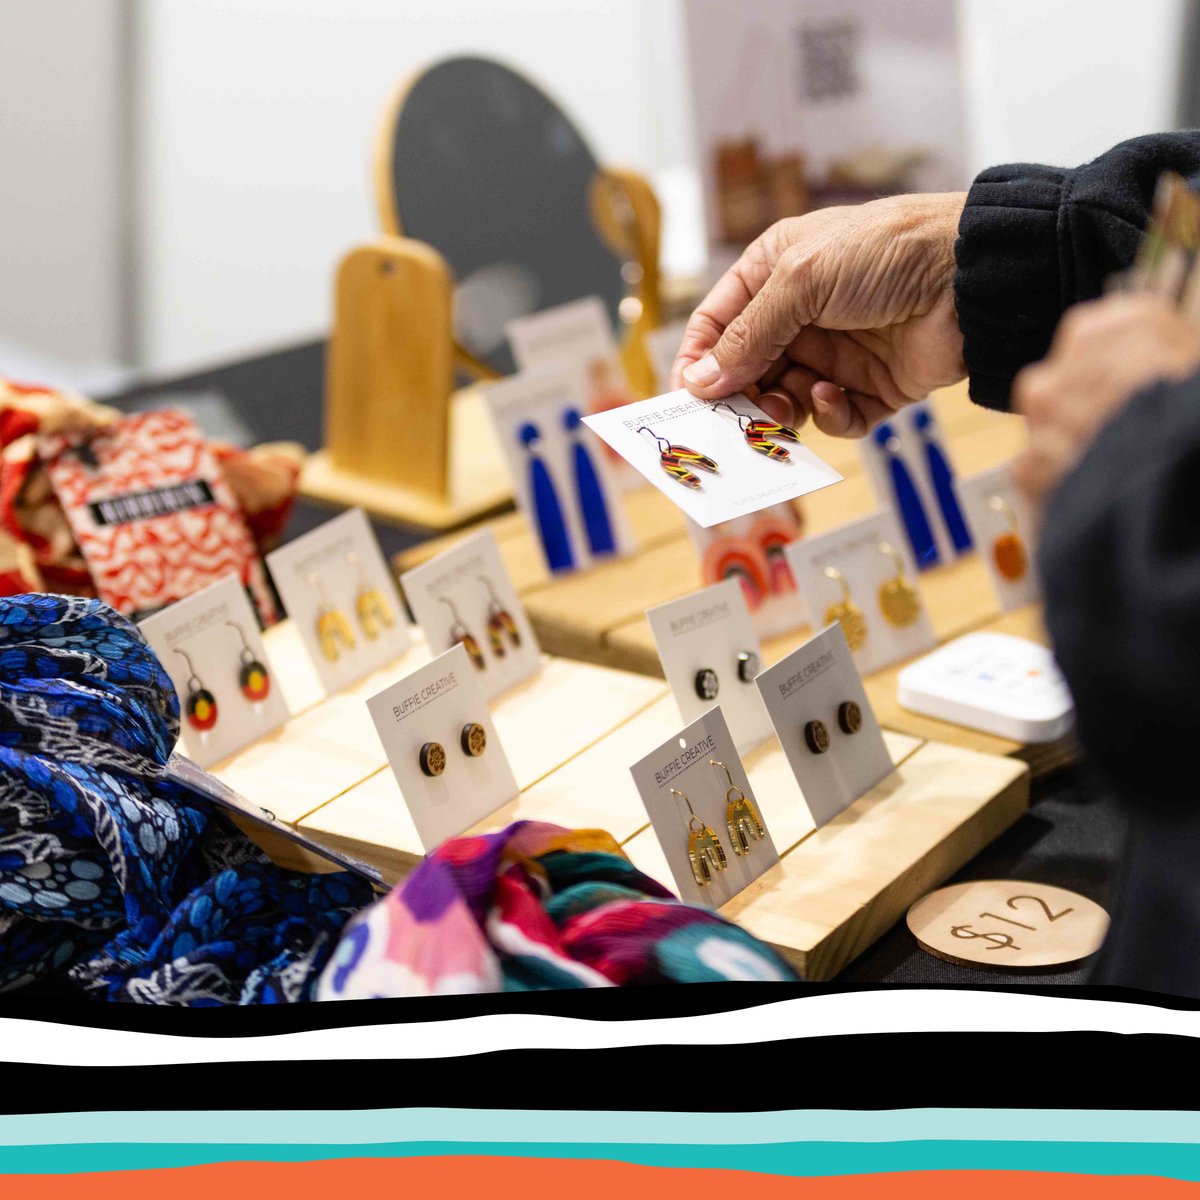 Do you want an opportunity to connect with delegates, showcase your brand and be a part of an incredible week? Join us as an exhibitor at the 2024 AIATSIS Summit. Secure your booth today! aiatsis.gov.au/whats-new/even…